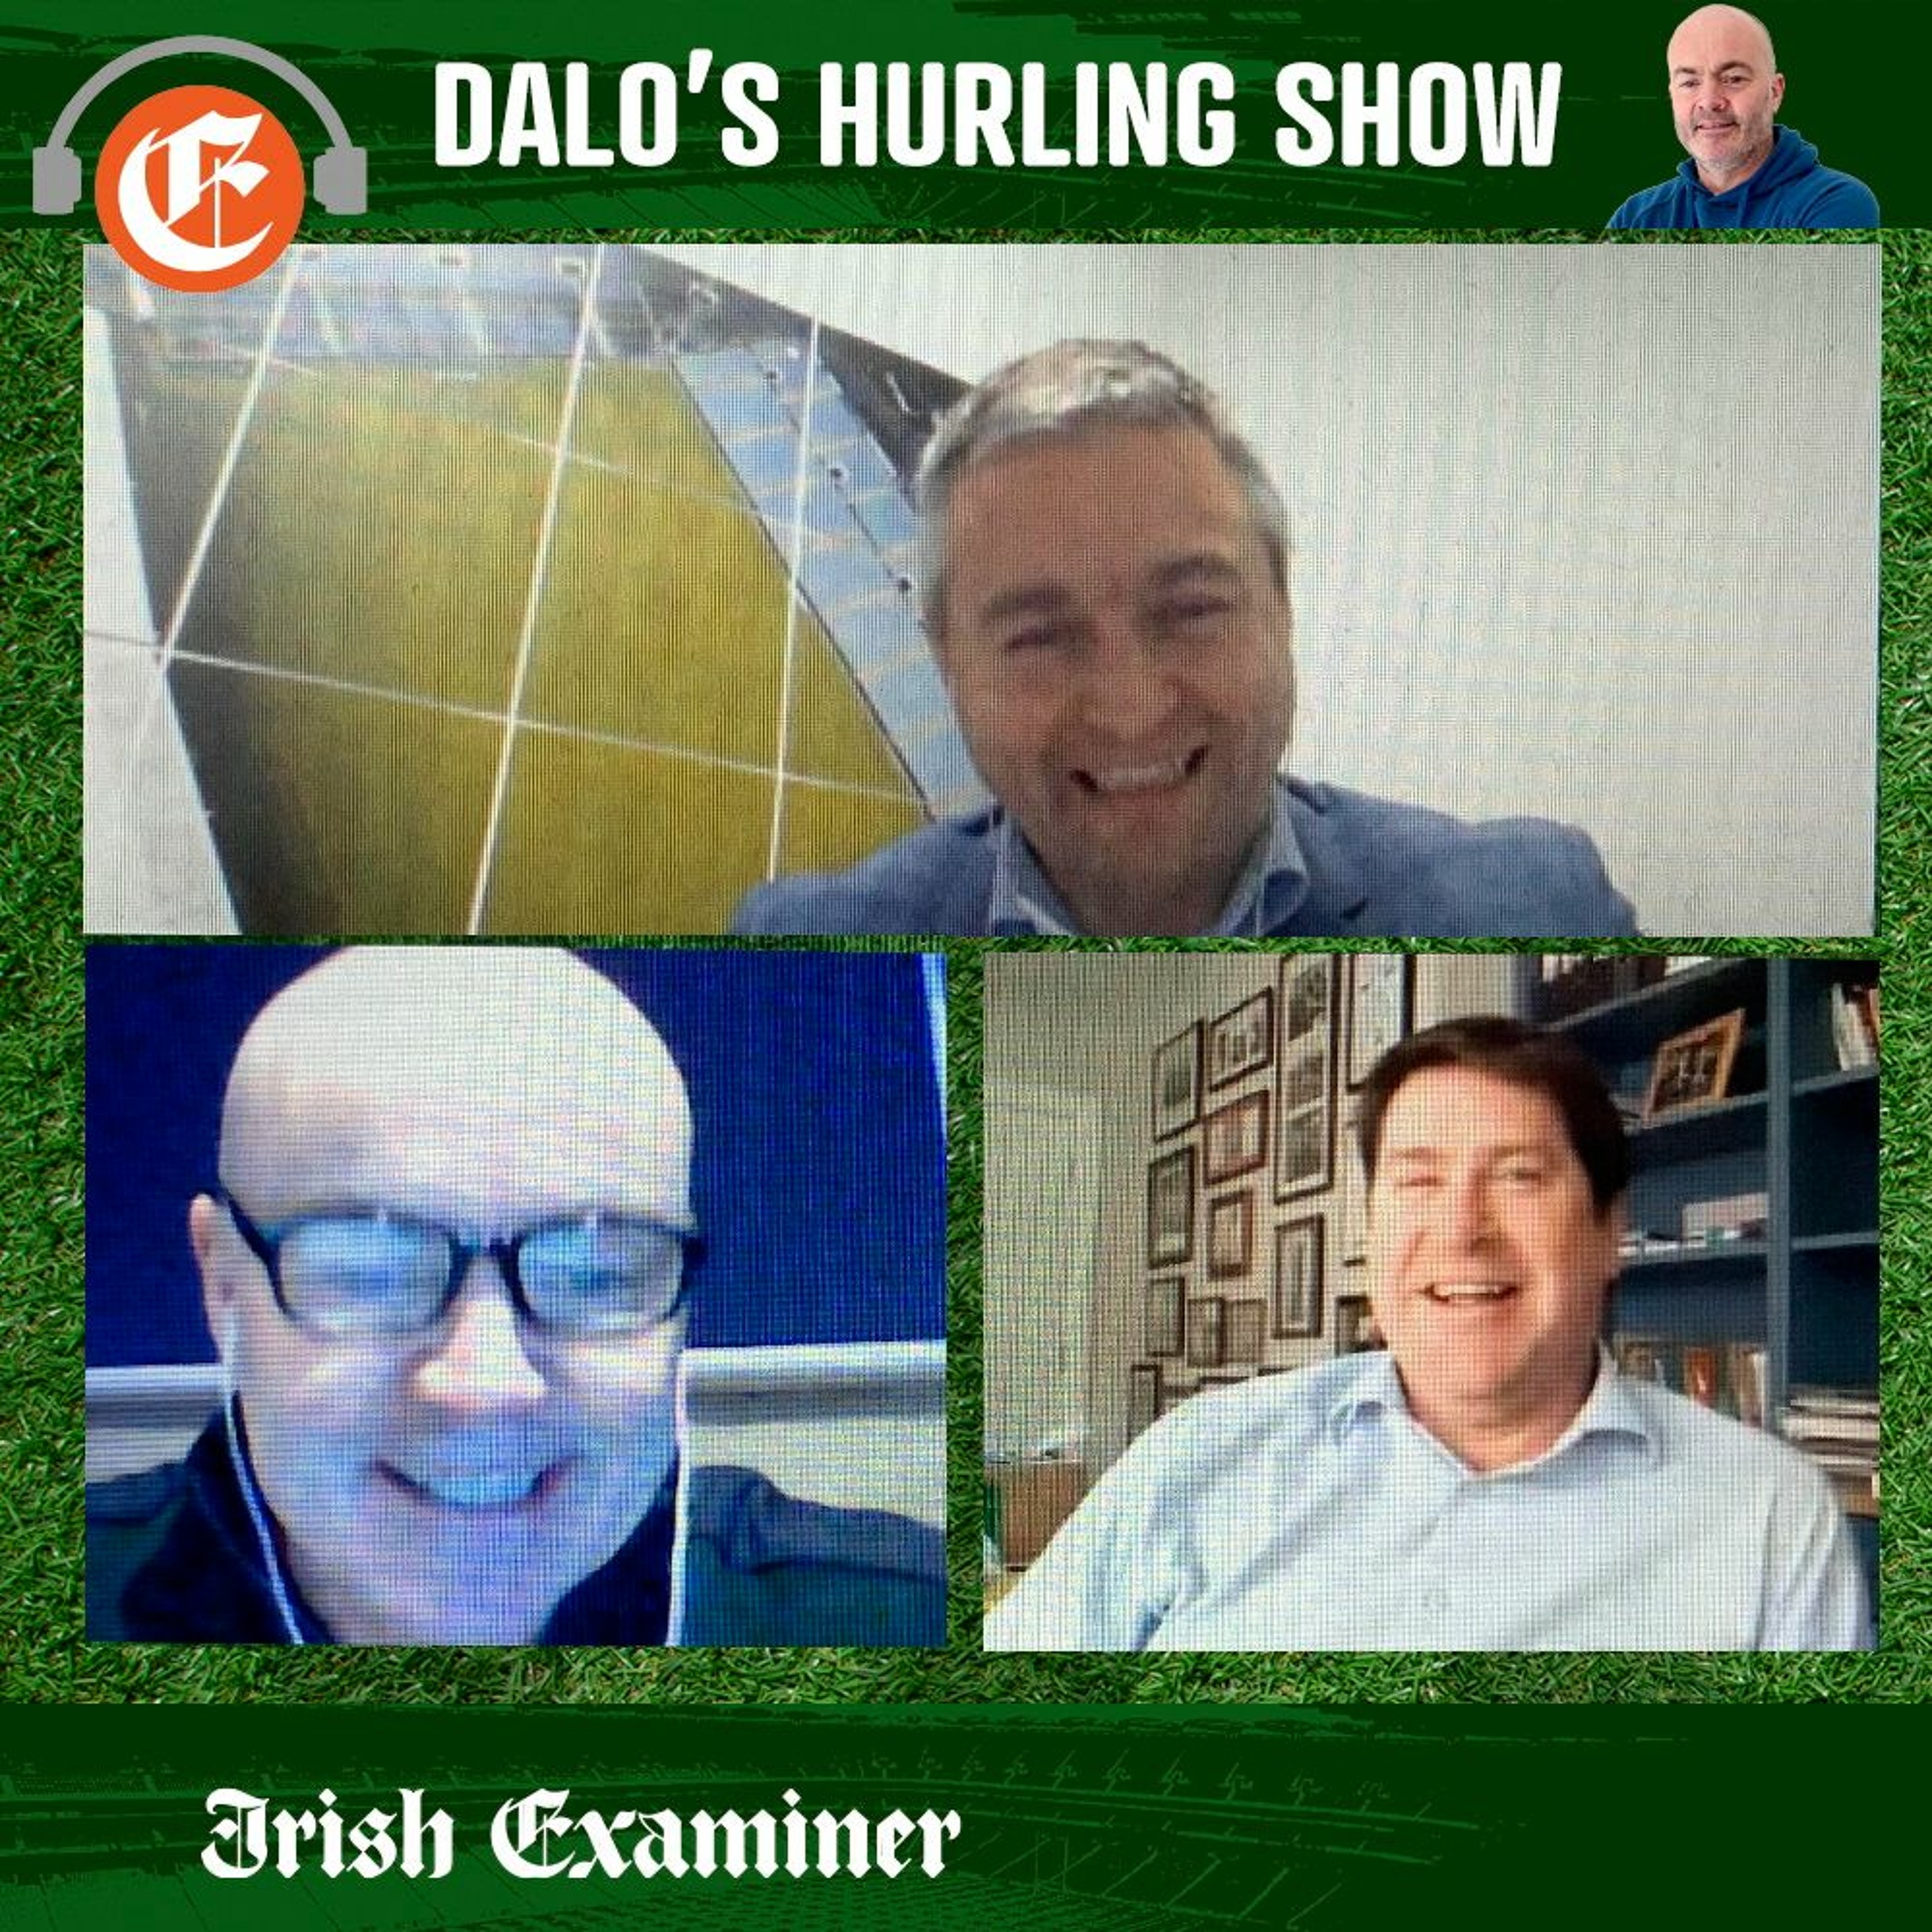 Dalo’s Hurling Show: Superclub St Thomas’, goodbye Seanie, rumours of Dalo’s demise exaggerated